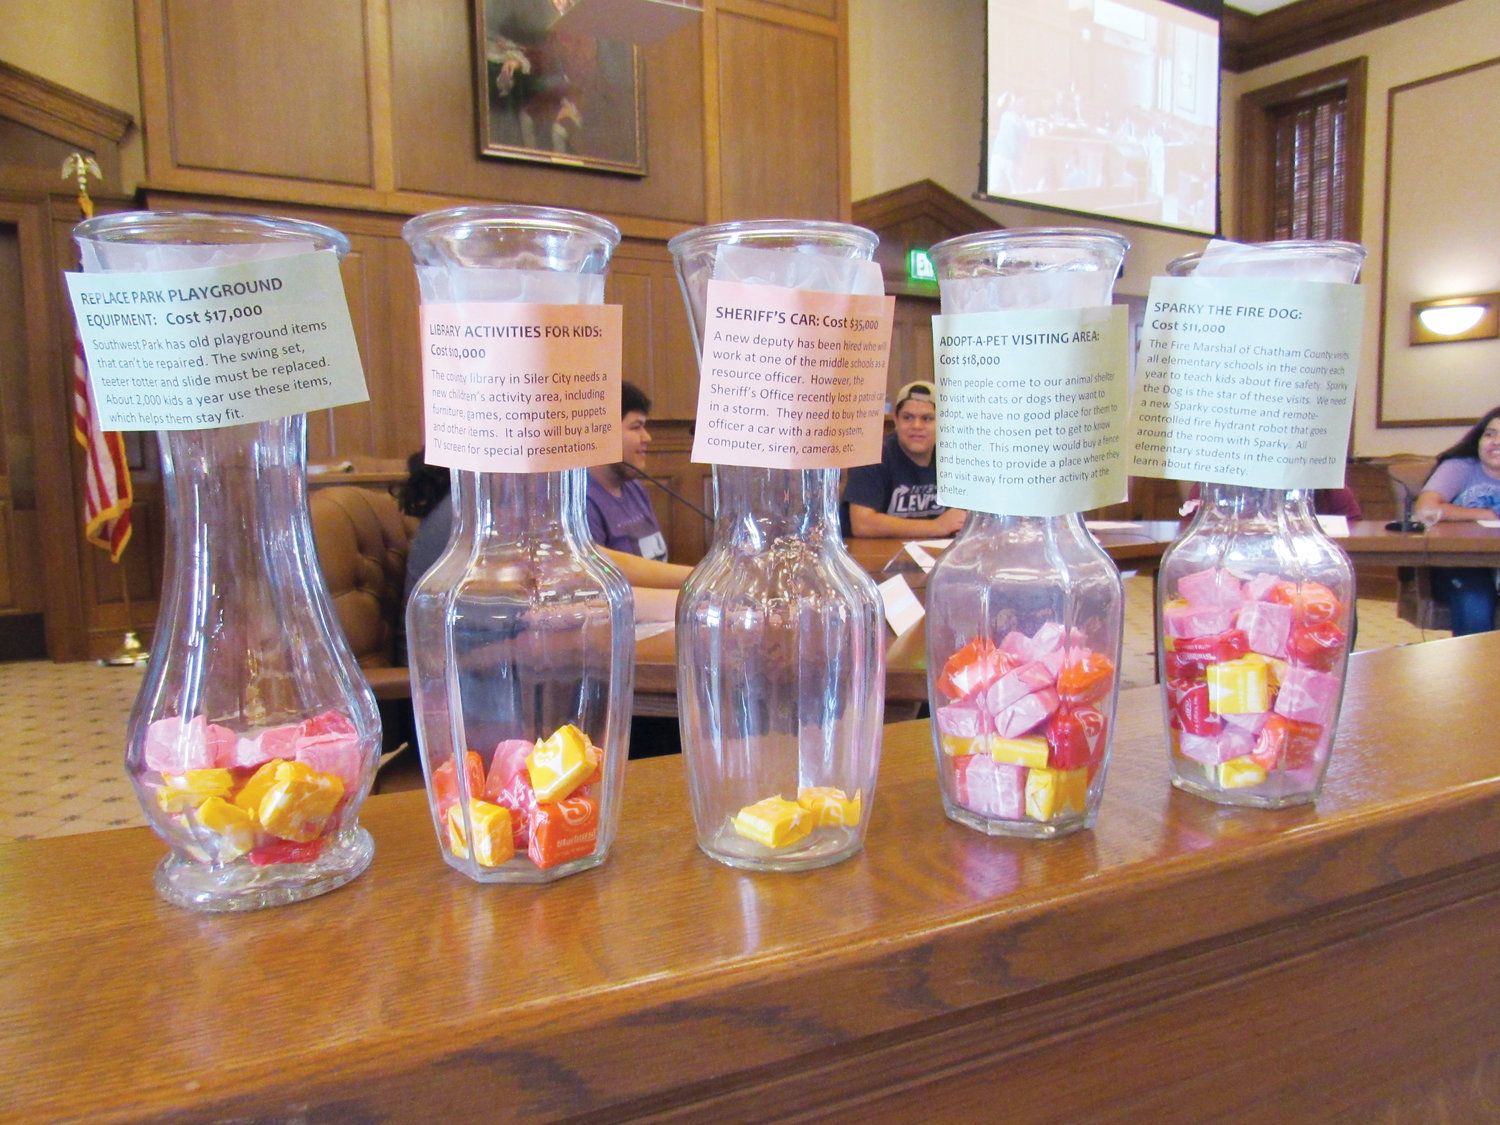 Picture of the voting vases with starbursts that show which projects got funded